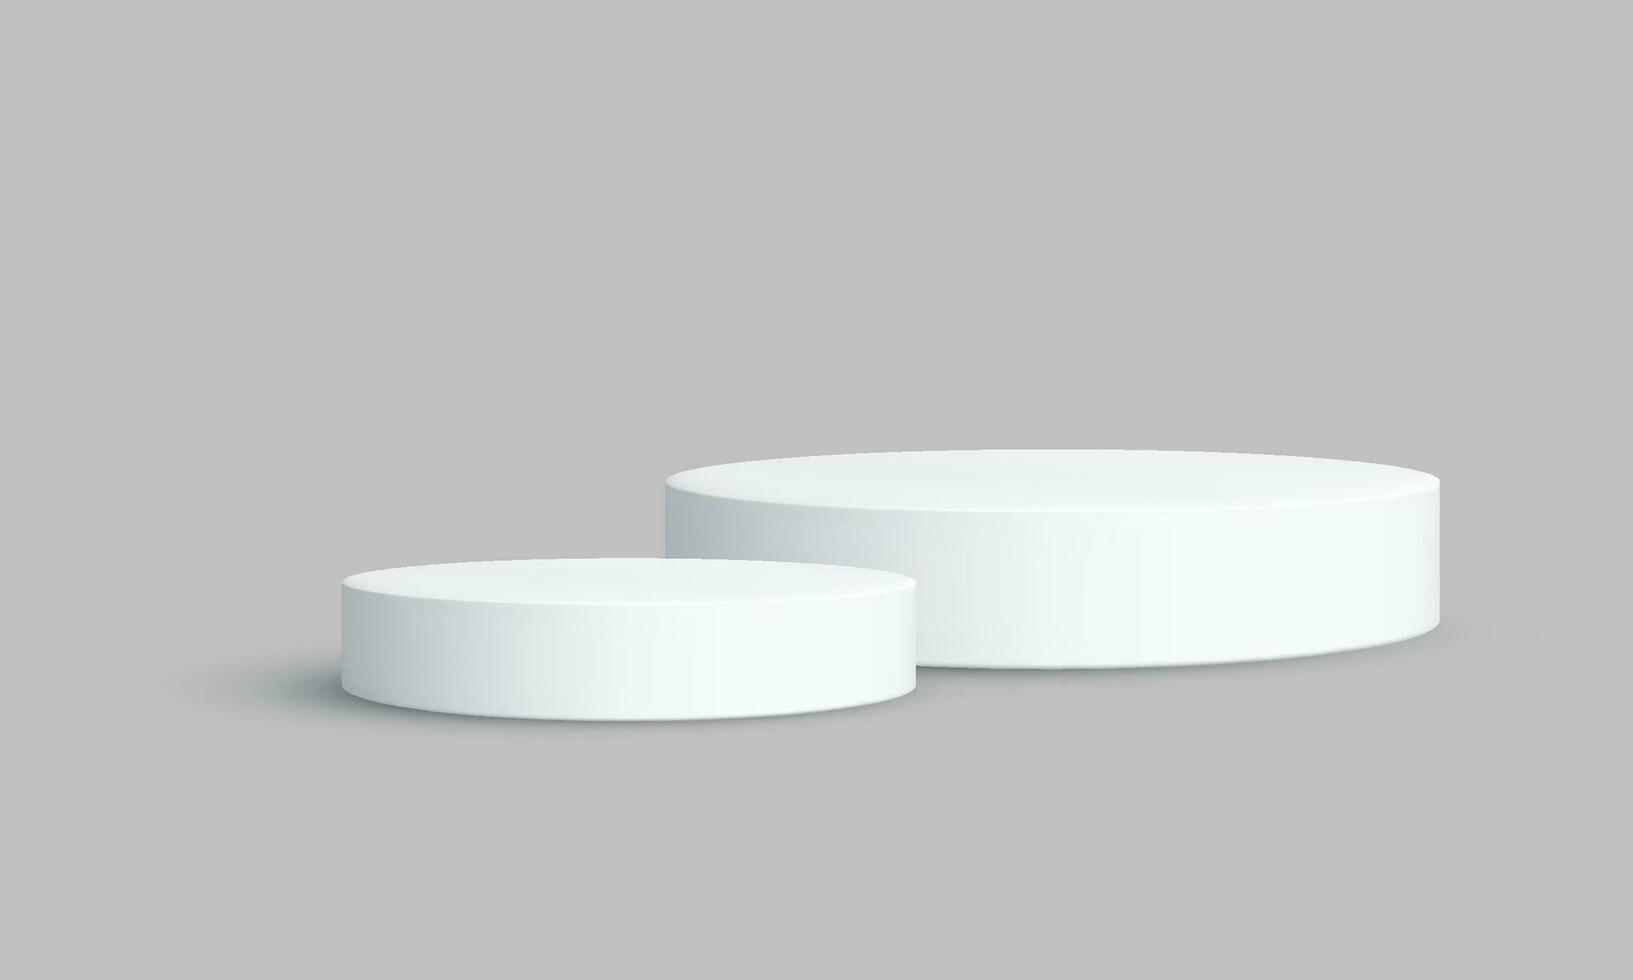 Vector round white podium pedestal product display stand background 3d rendering